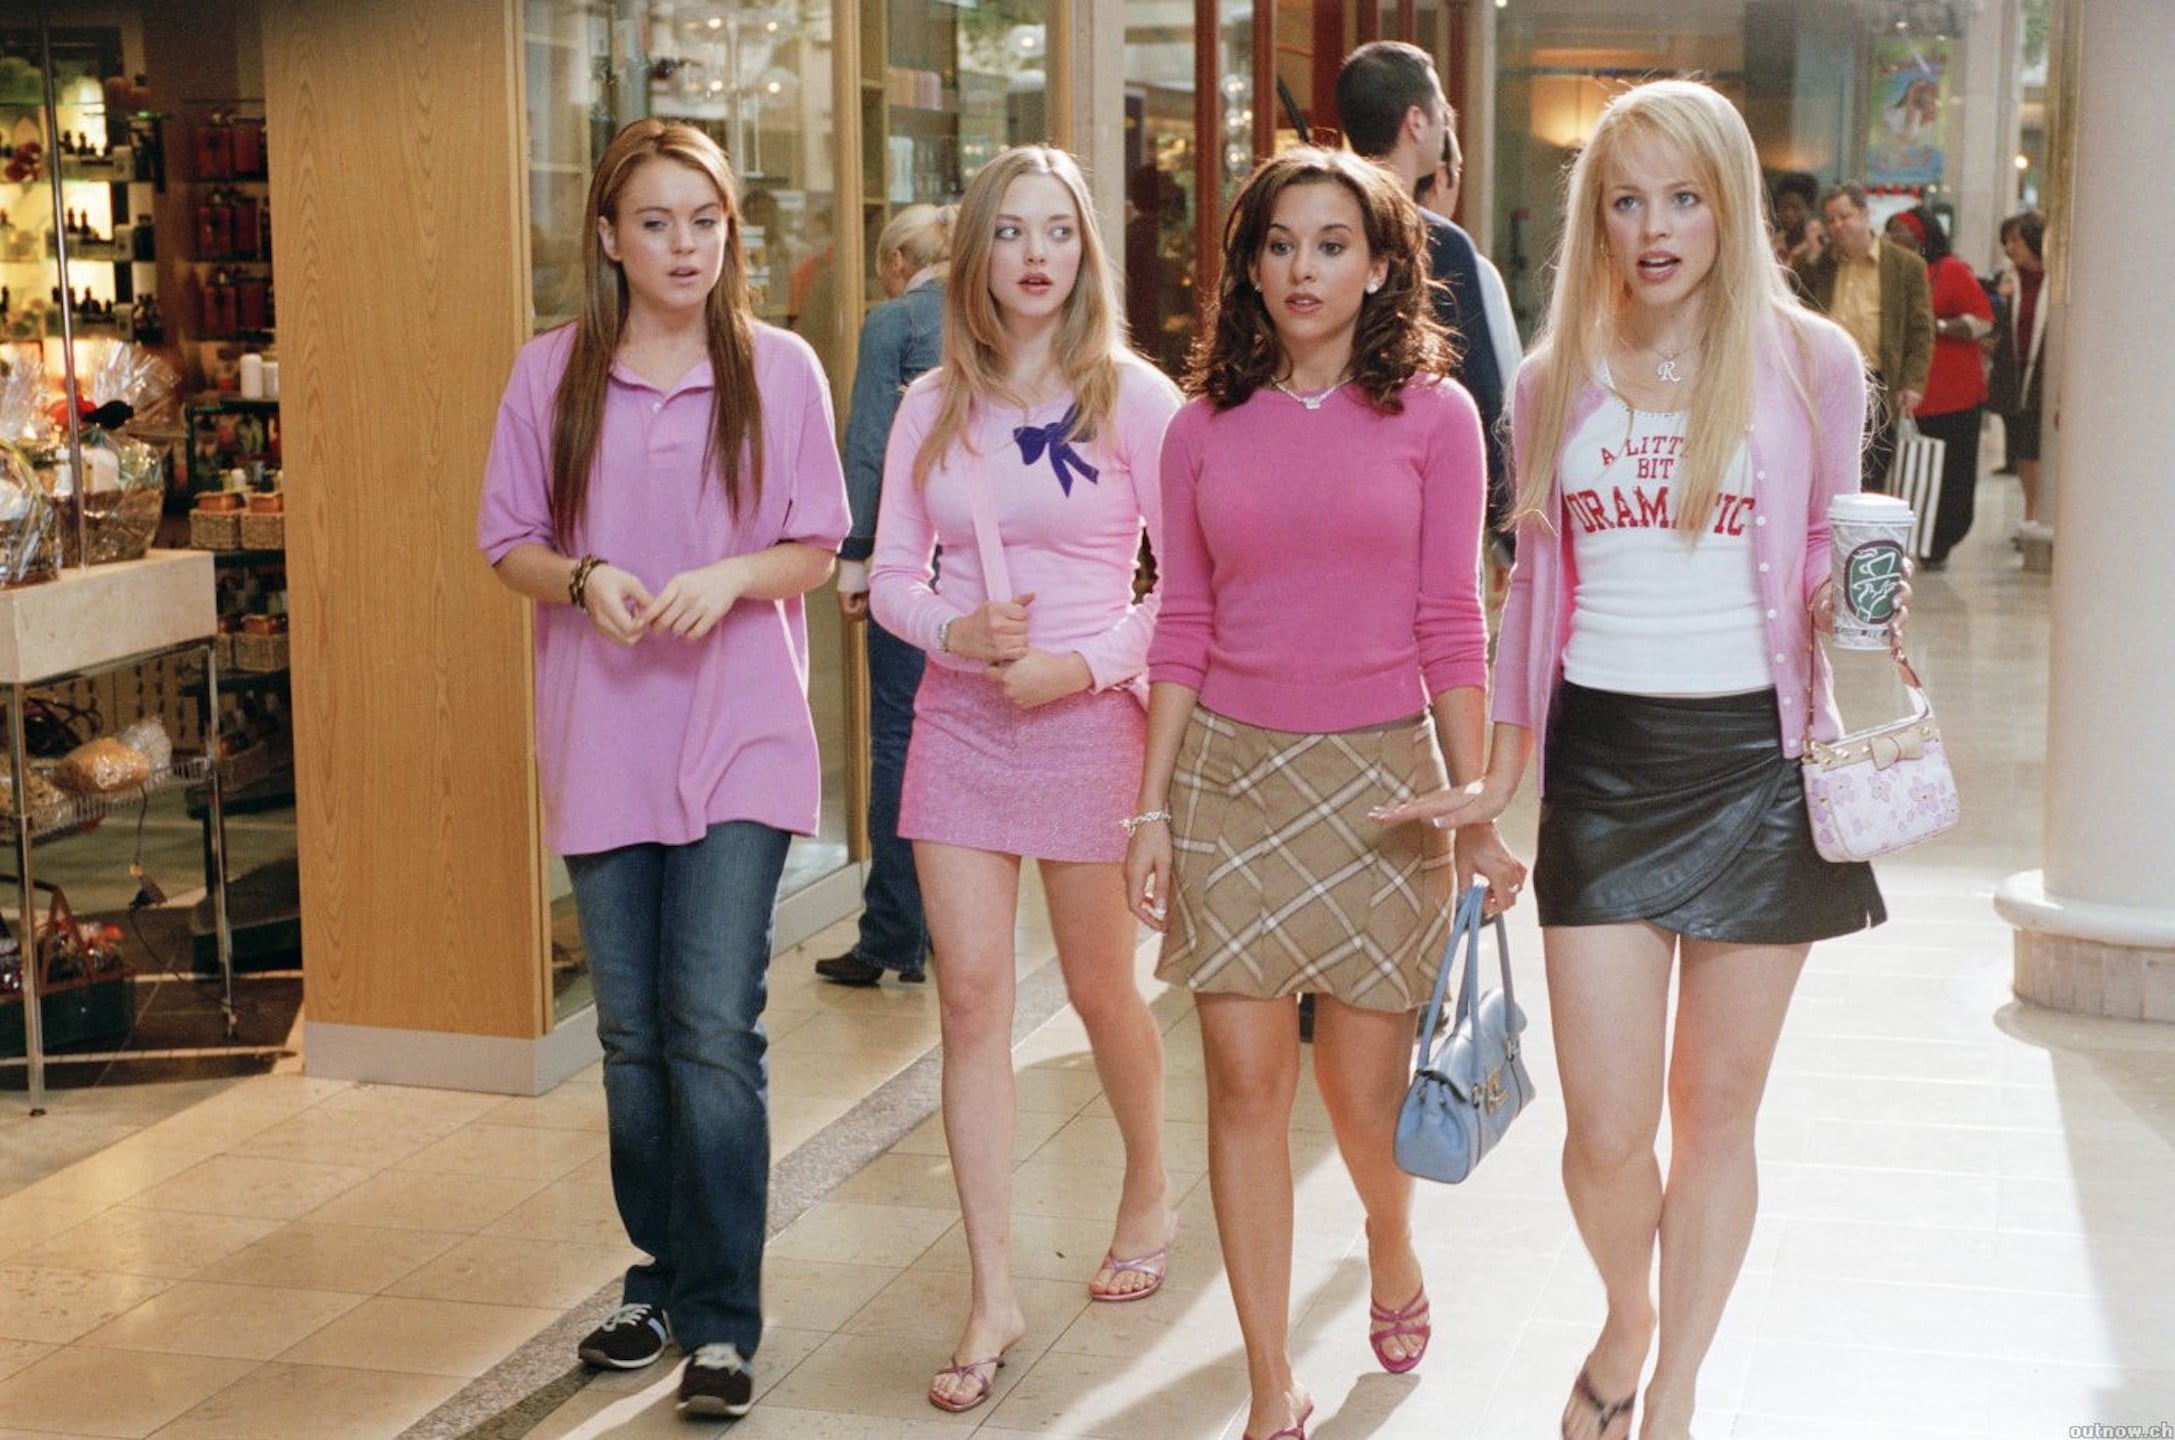 14 of the most iconic fashion moments from Mean Girls